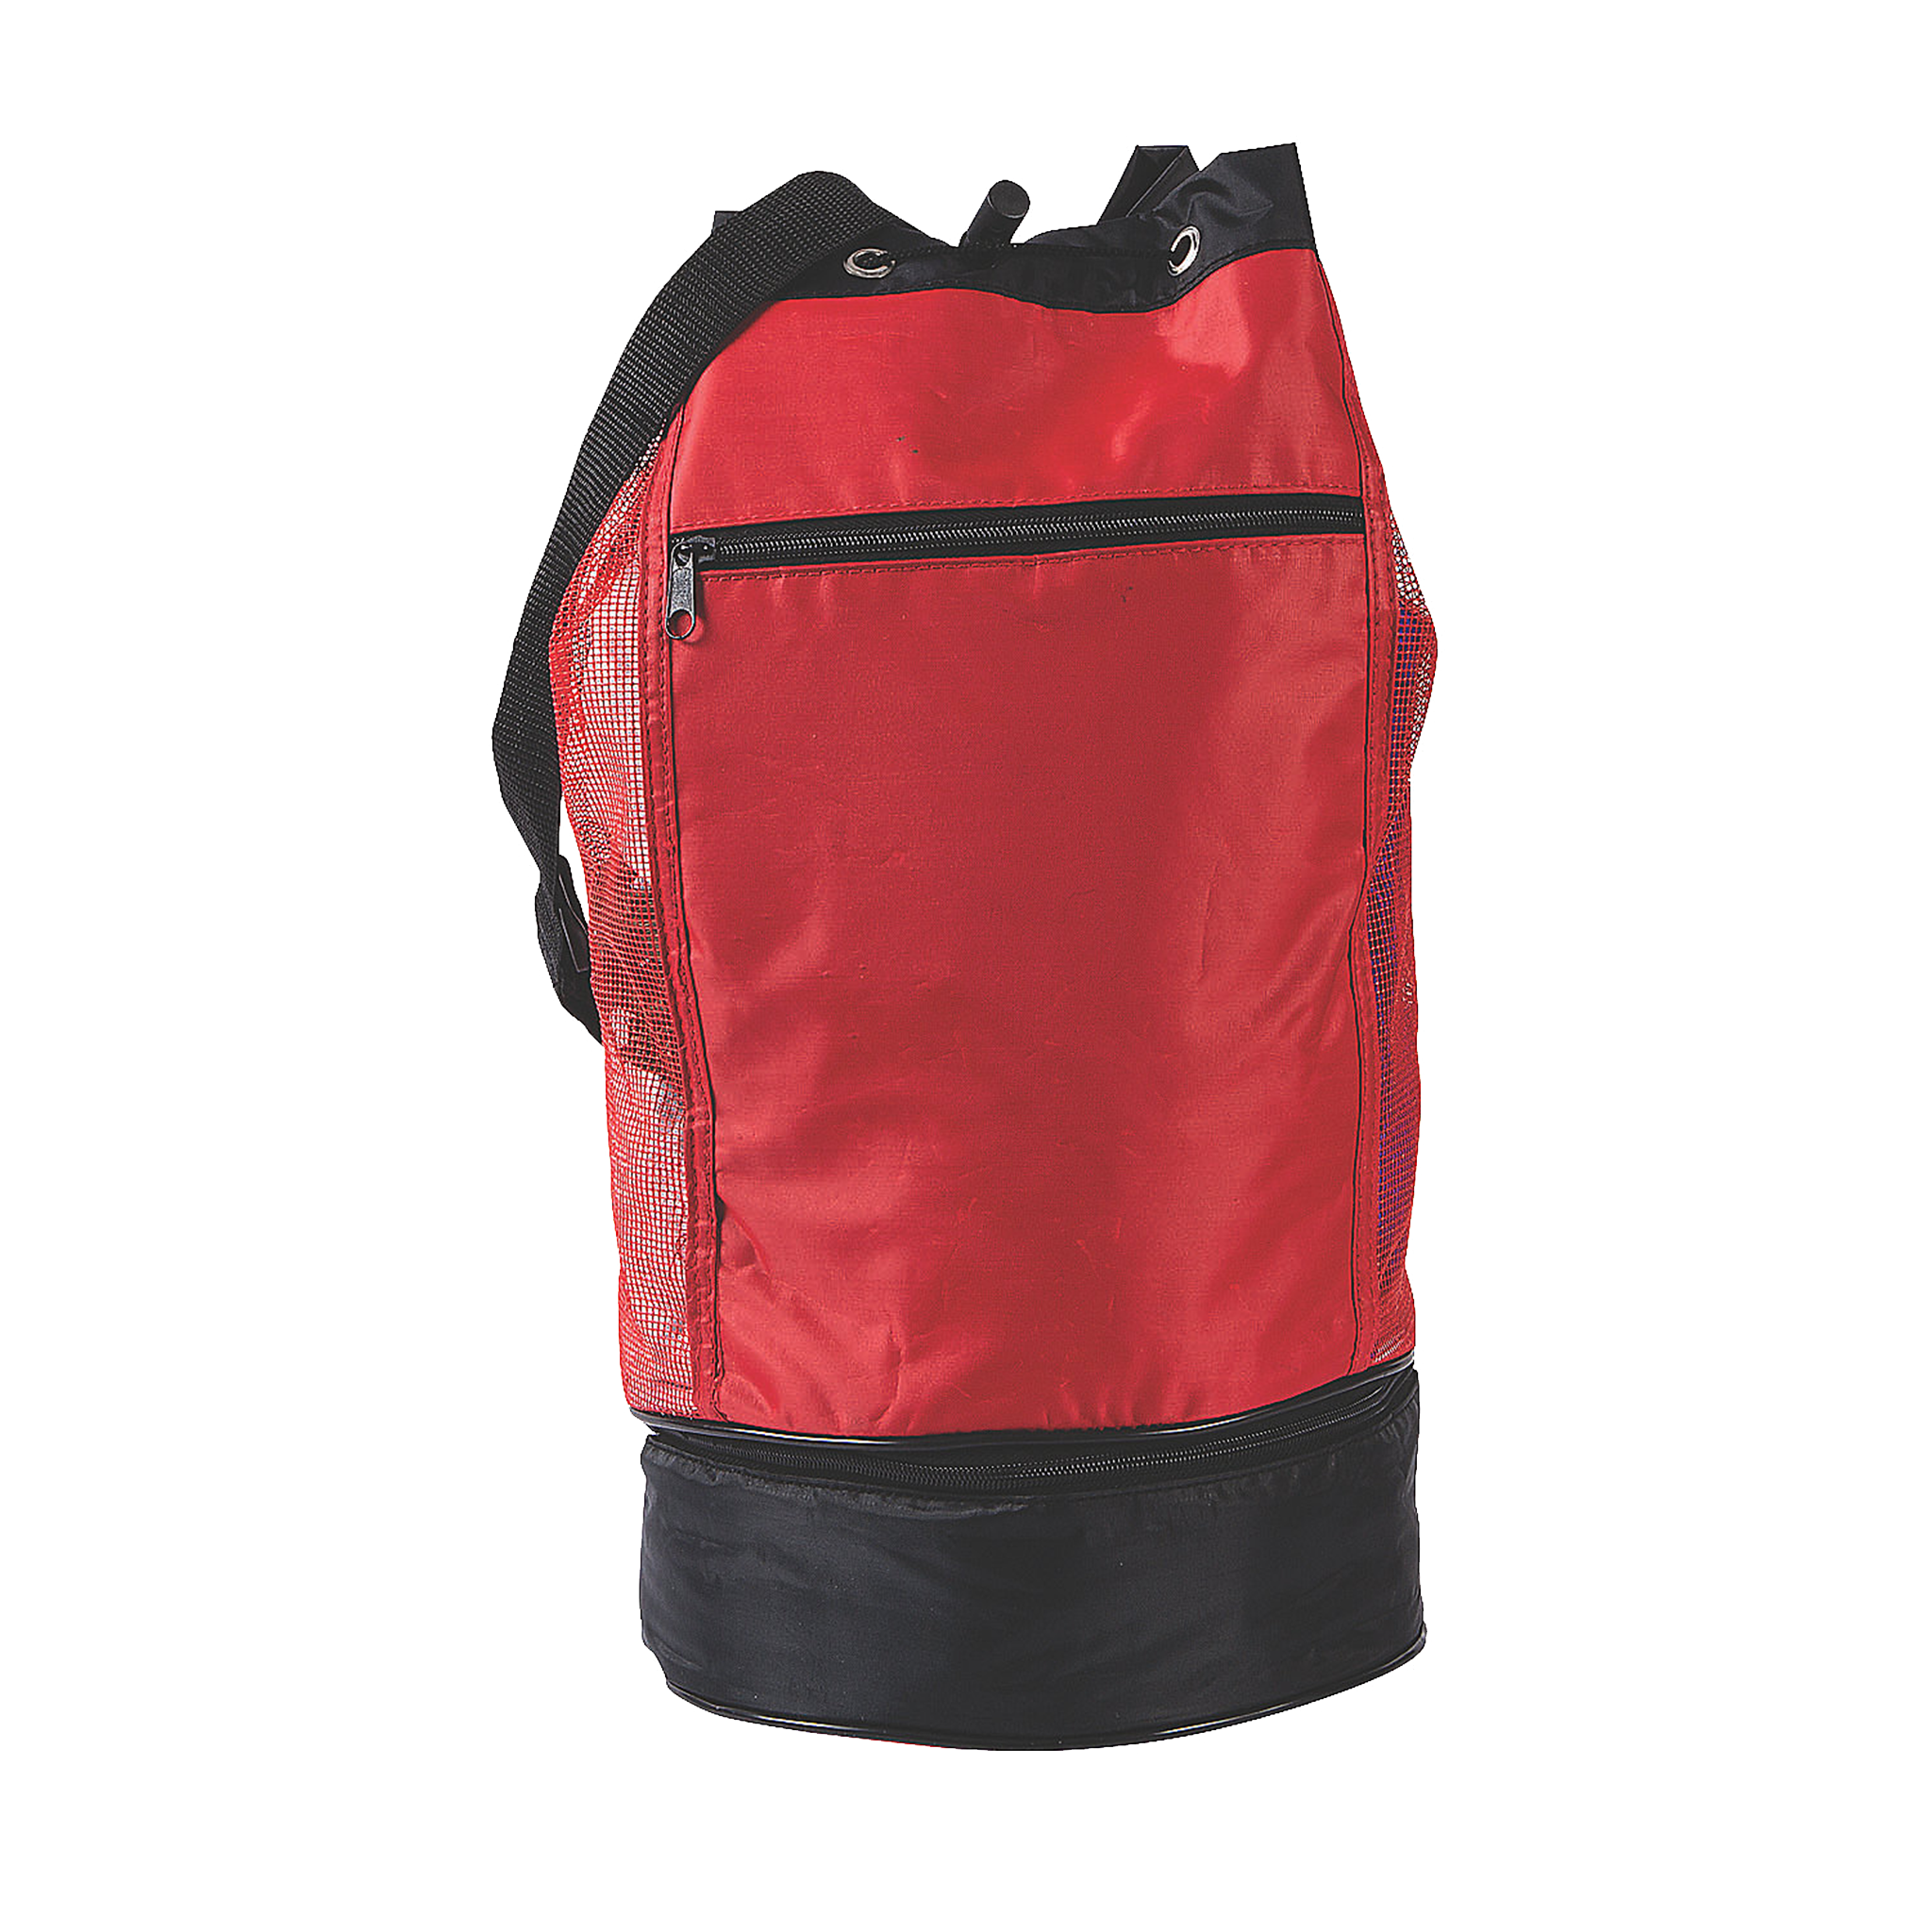 Drawstring Bag with Insulated Pocket (DB06)